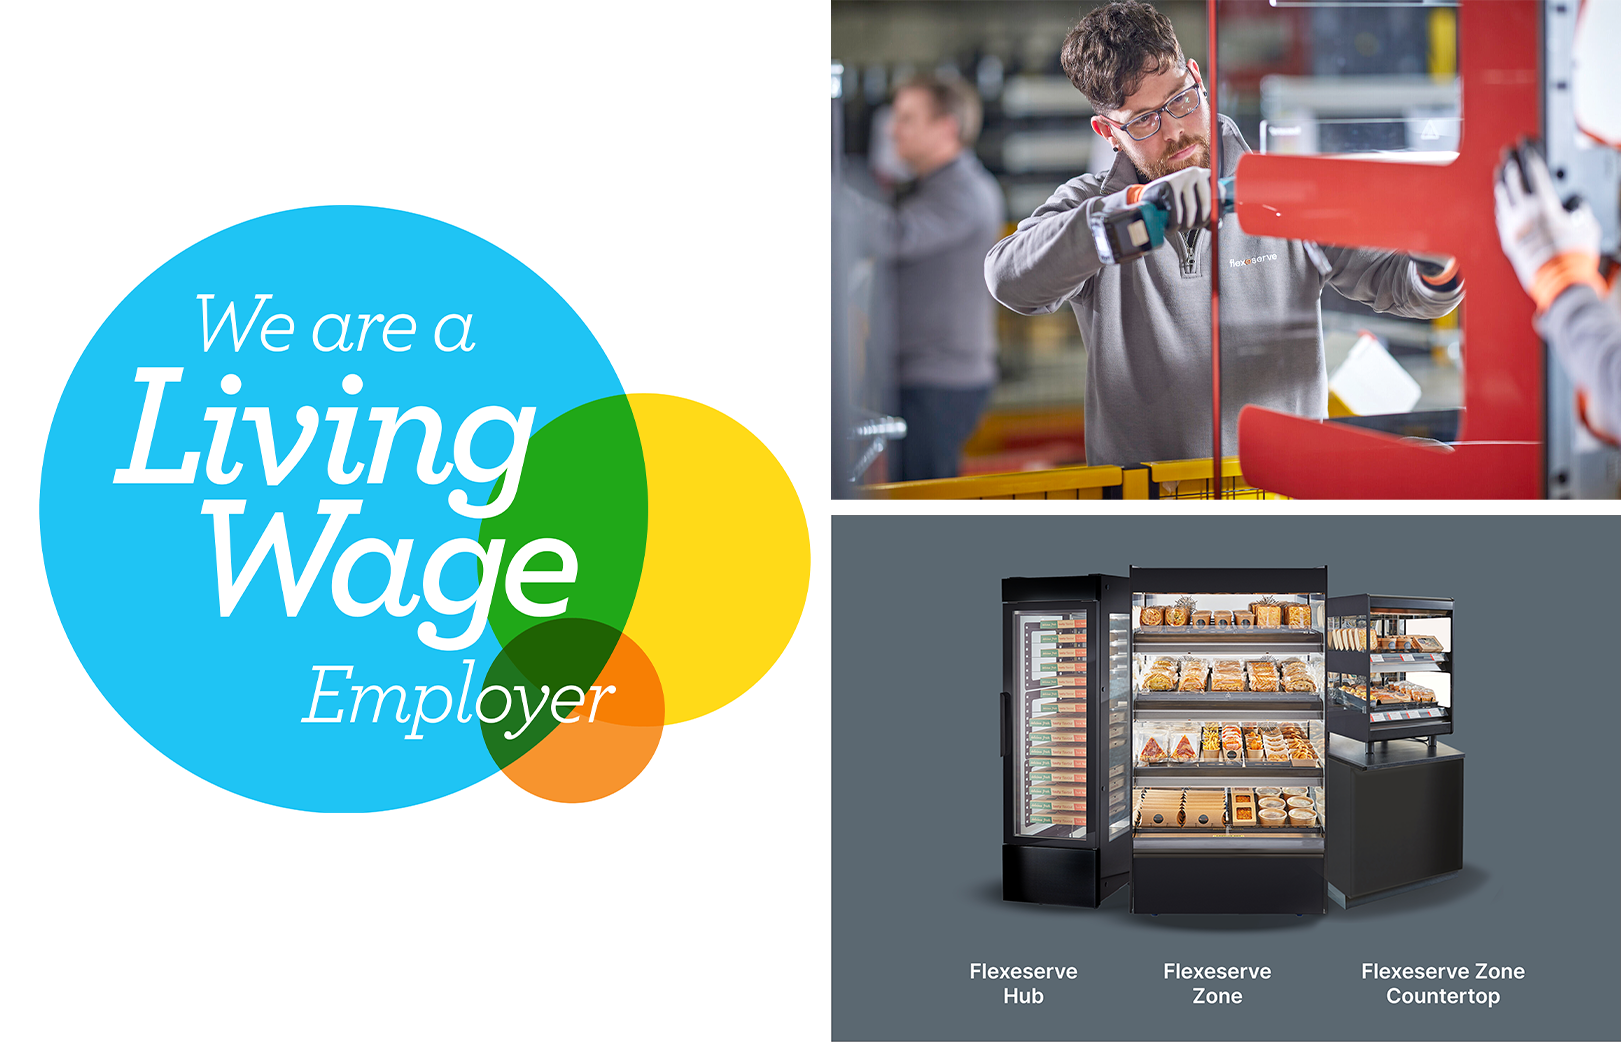 Lockup of the Living Wage Employer logo, a Flexeserve Partner in the production area assembling a heated display, and a montage of their hot-holding units